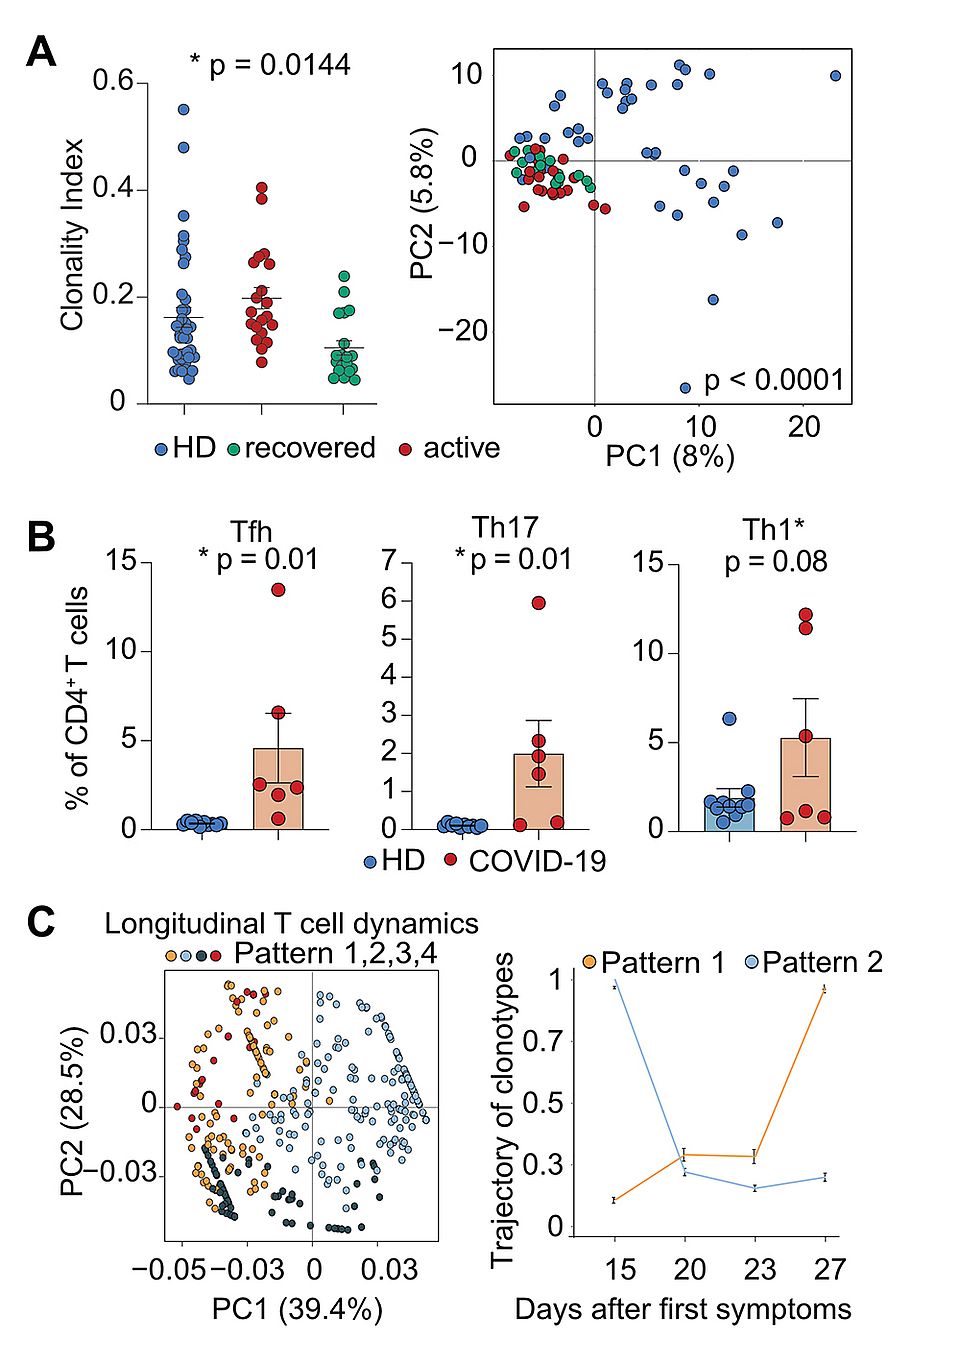 cell repertoire analysis and phenotyping in COVID-19 patients